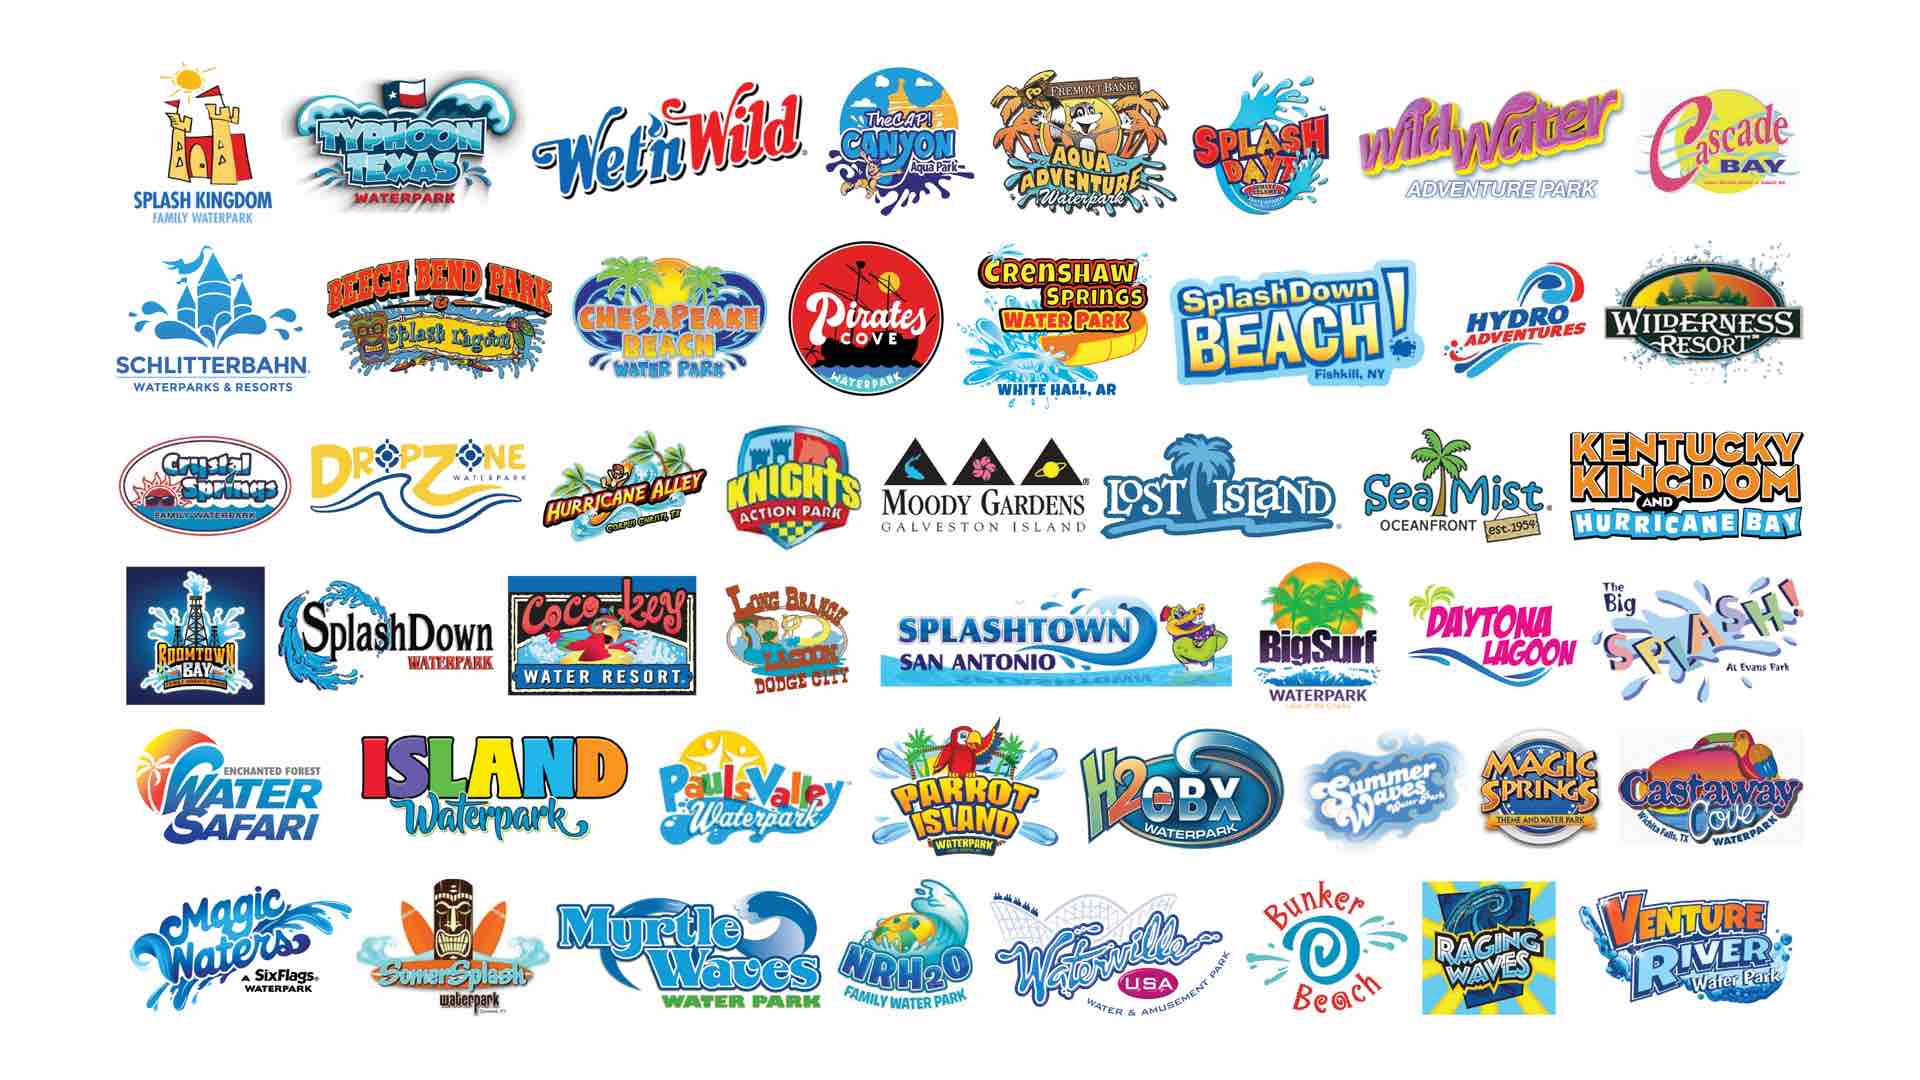 Logos from a few of our Neptune Splash Radio Partners